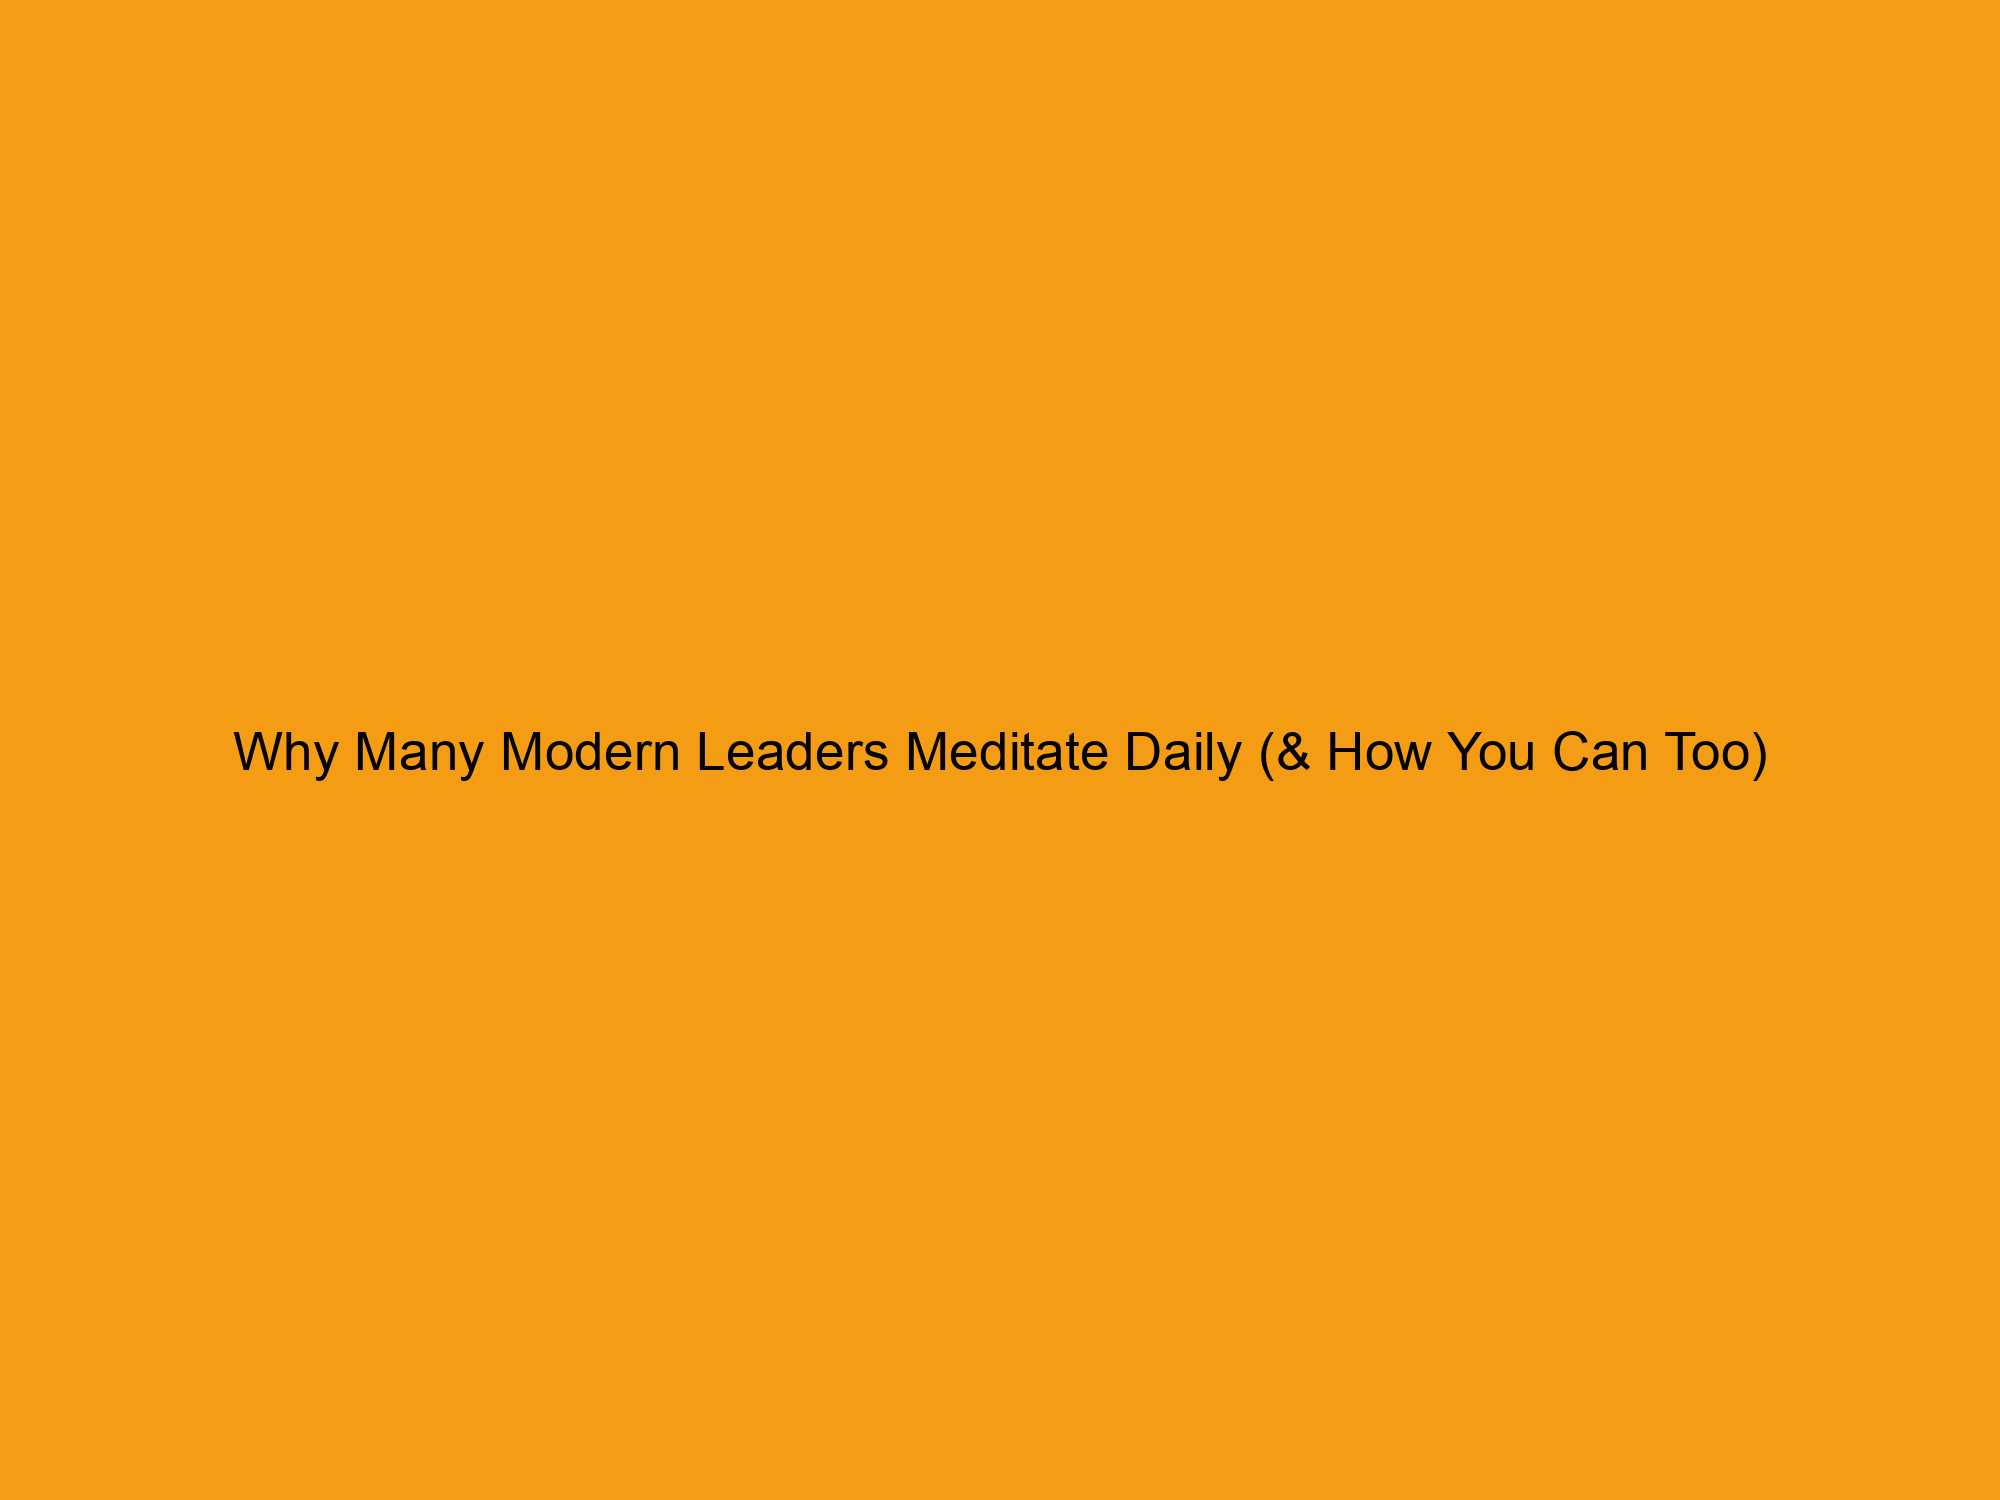 Why Many Modern Leaders Meditate Daily (& How You Can Too)